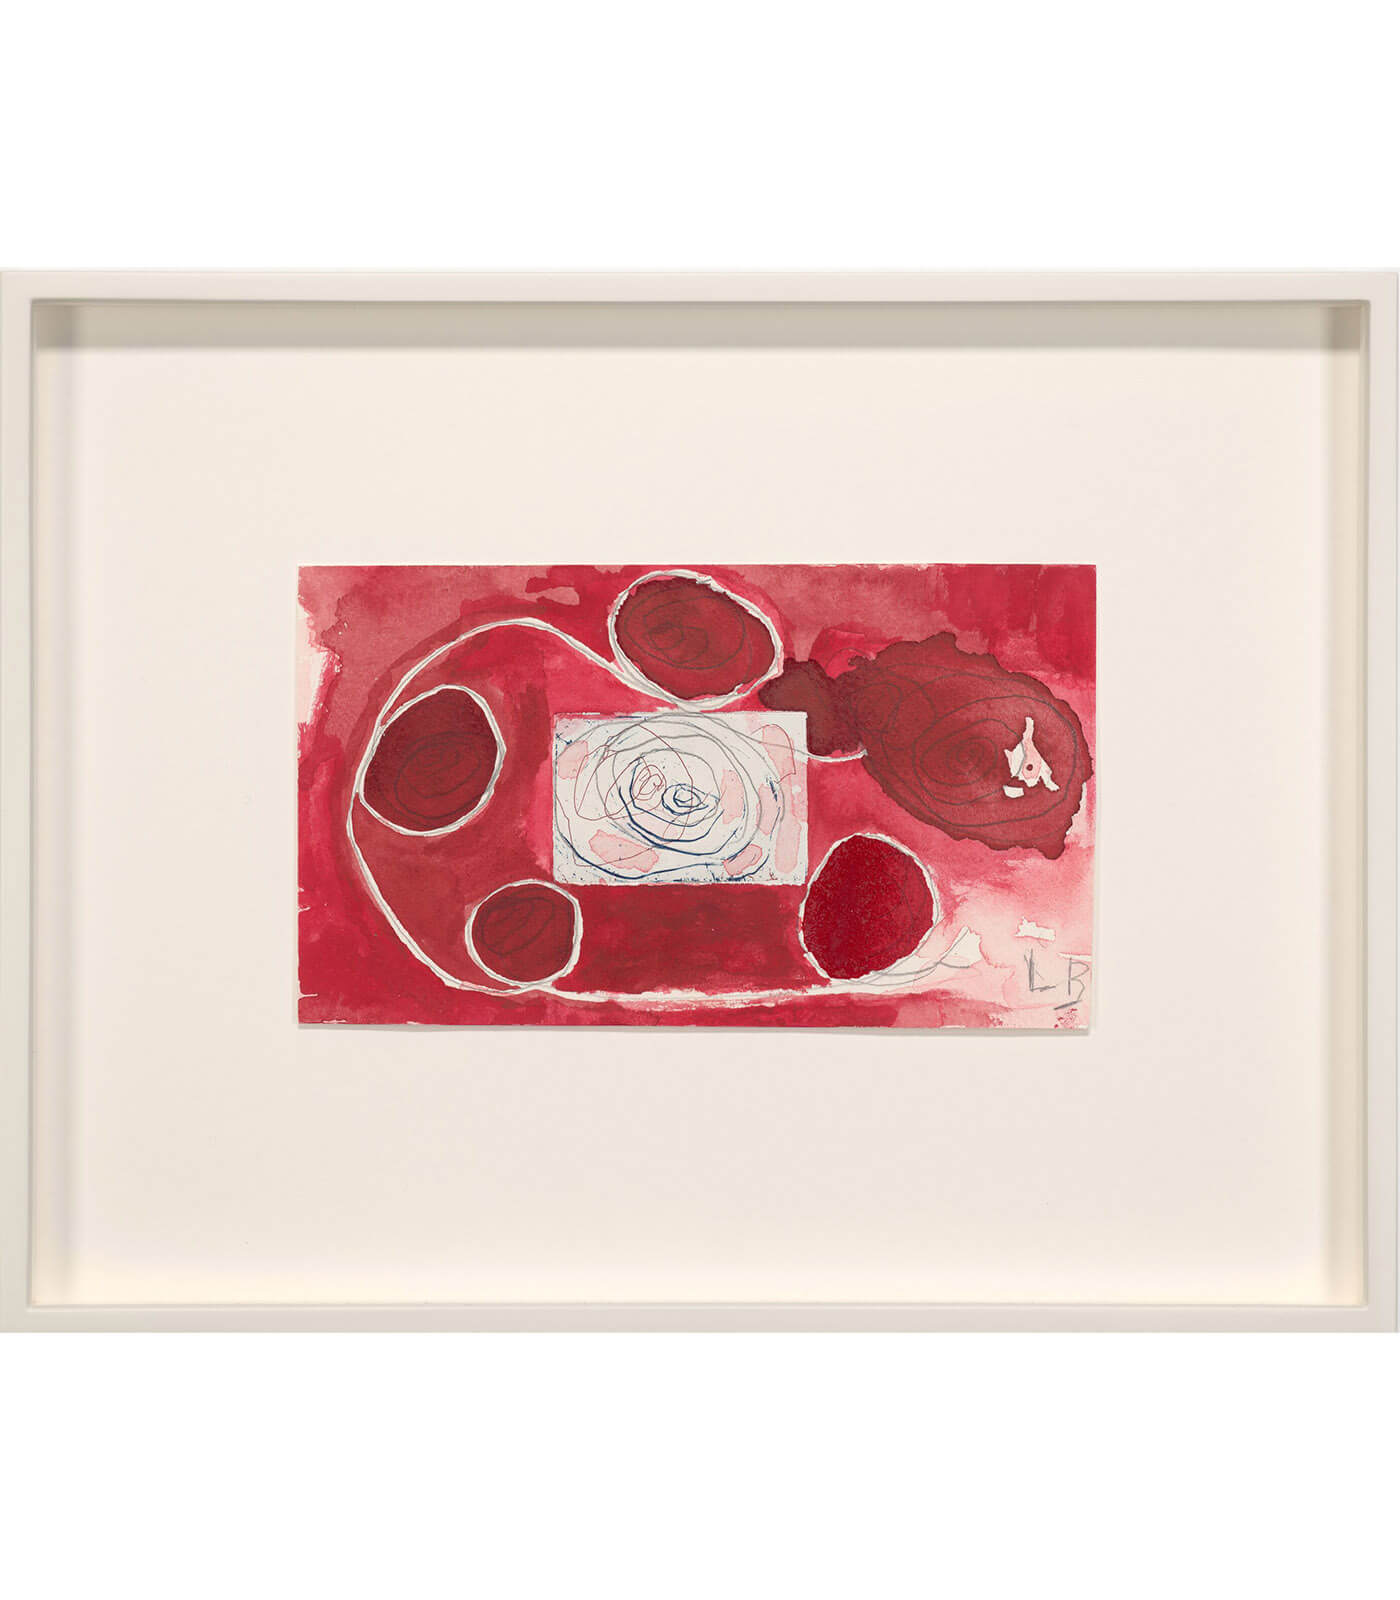 Louise Bourgeois' Prints—A Captivating New Take on Intimacy and Betrayal